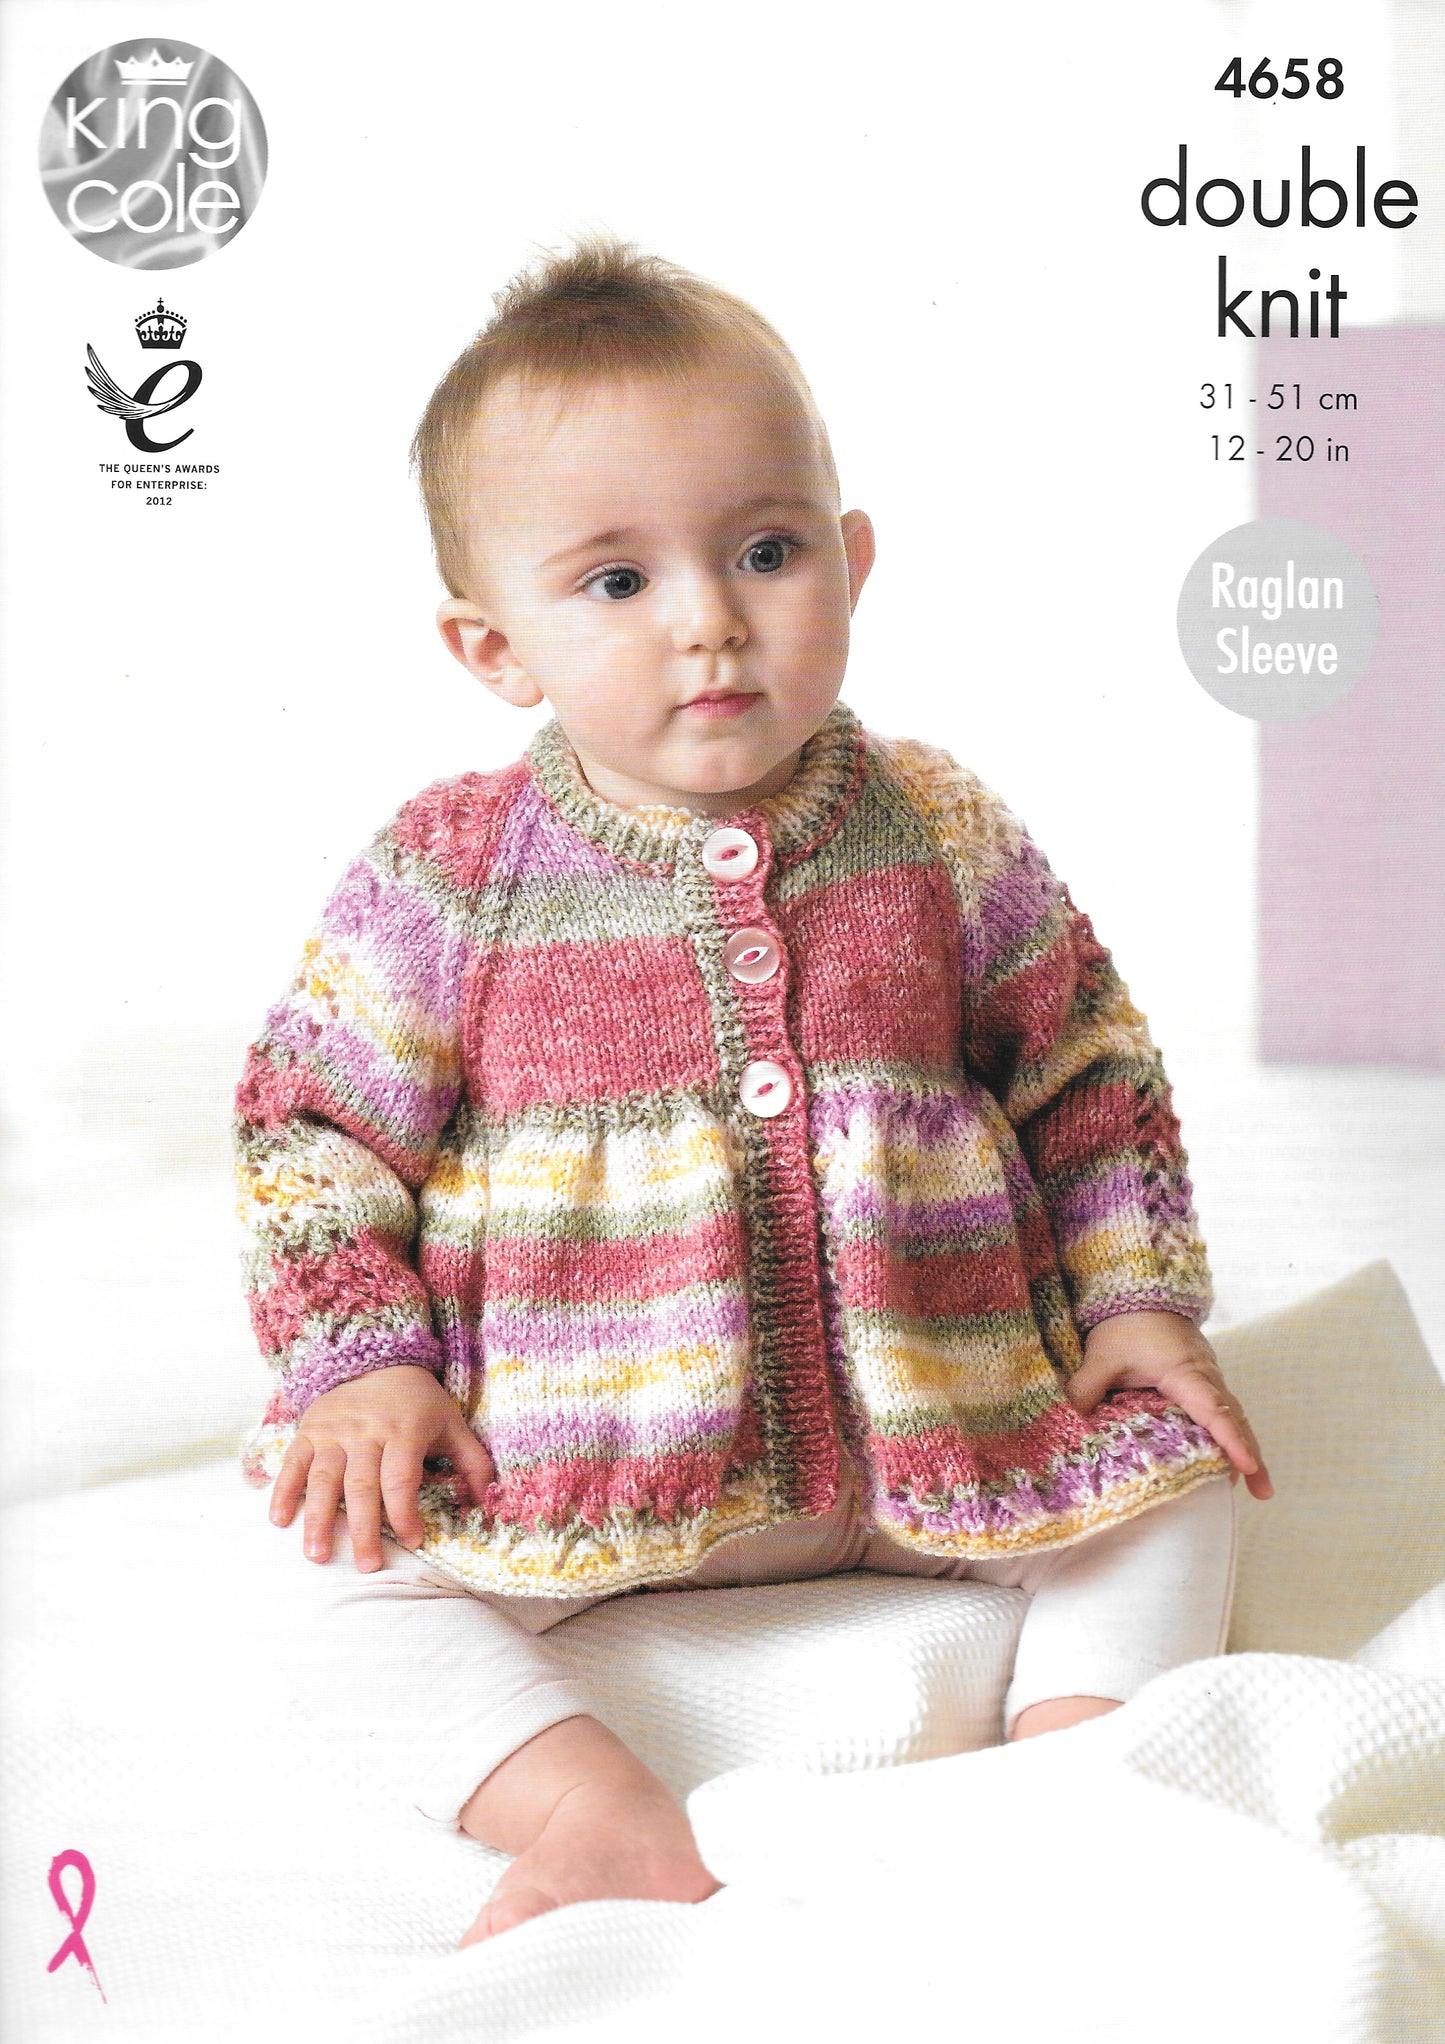 King Cole 4795 Double Knit Baby Cardigans, Hat and Blanket knitting pattern